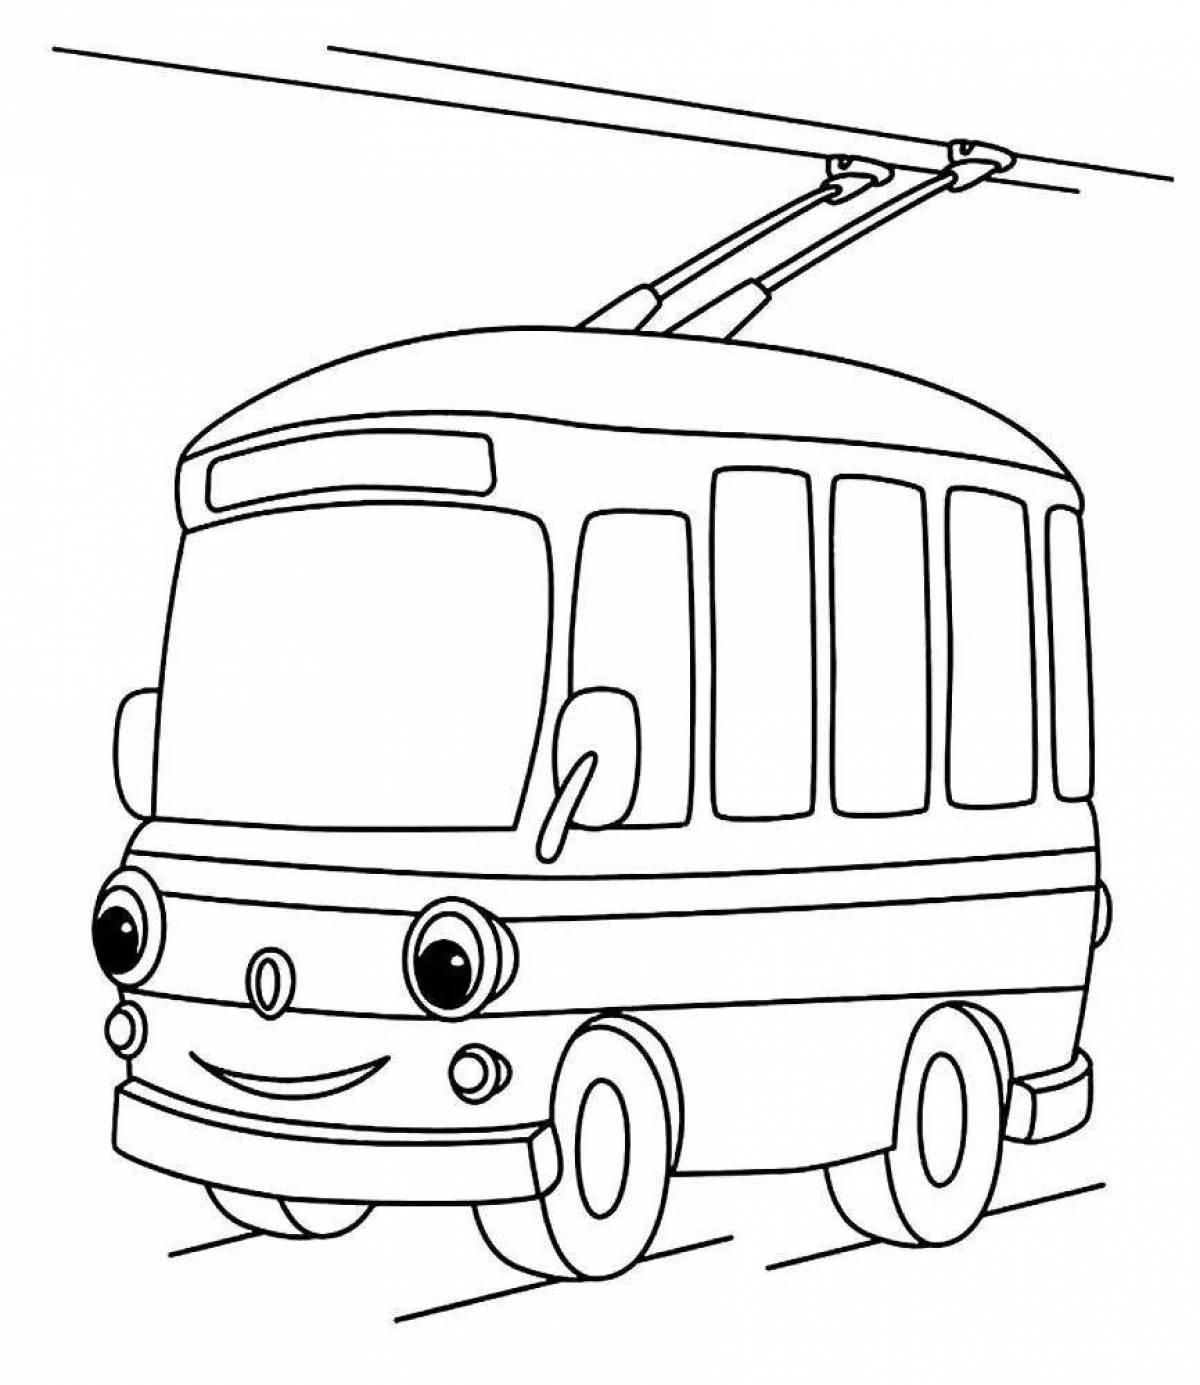 Great transport coloring book for toddlers